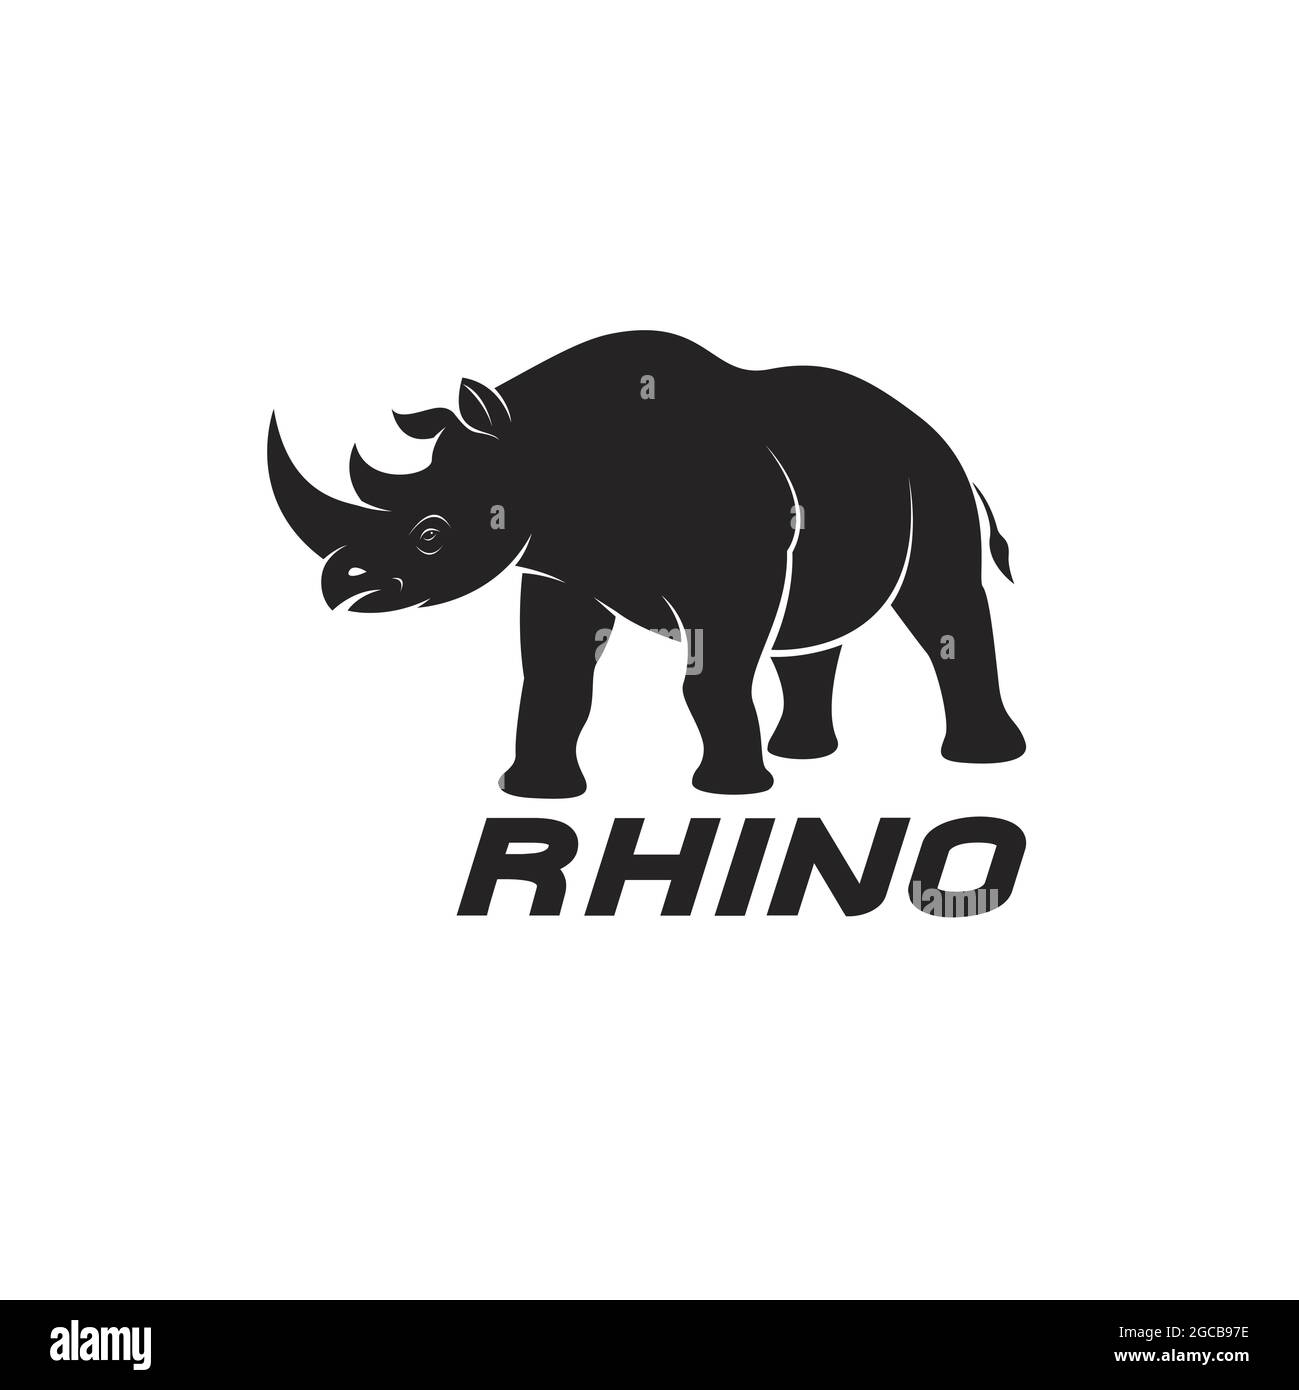 Vector of rhinoceros on a white background. Wild Animals. Rhino logo or icon.  Easy editable layered vector illustration. Stock Vector